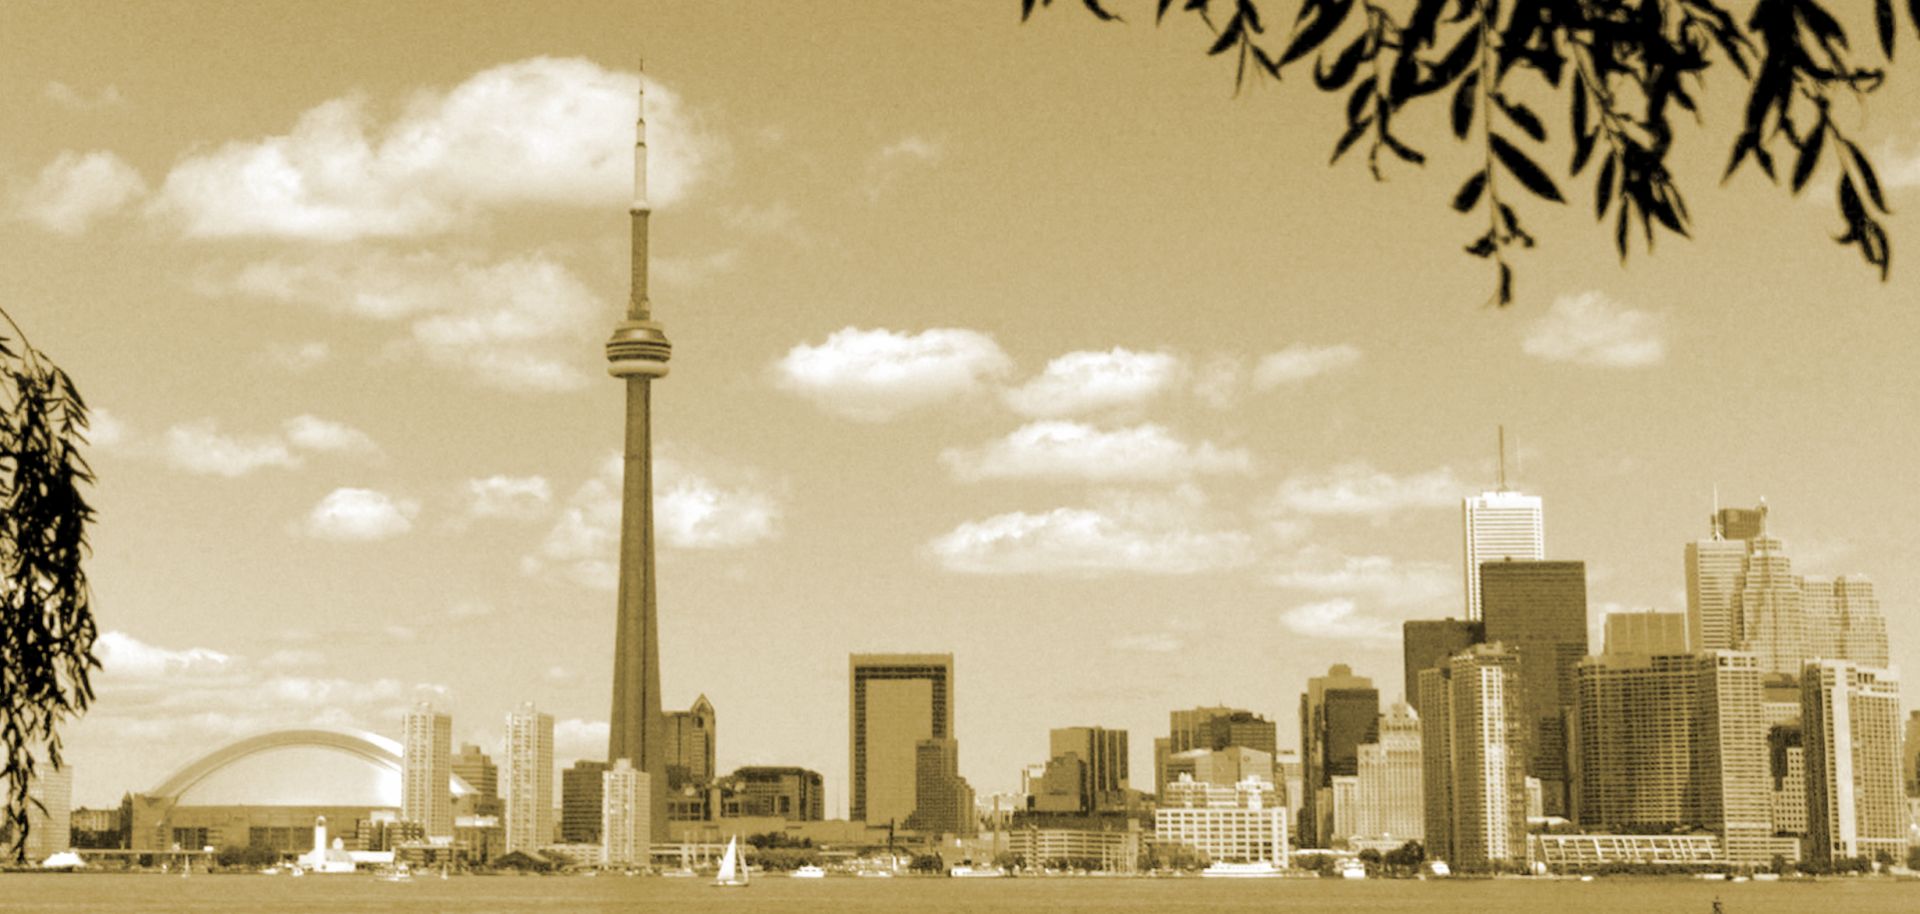 The iconic CN Tower anchors Toronto's skyline on a clear day.